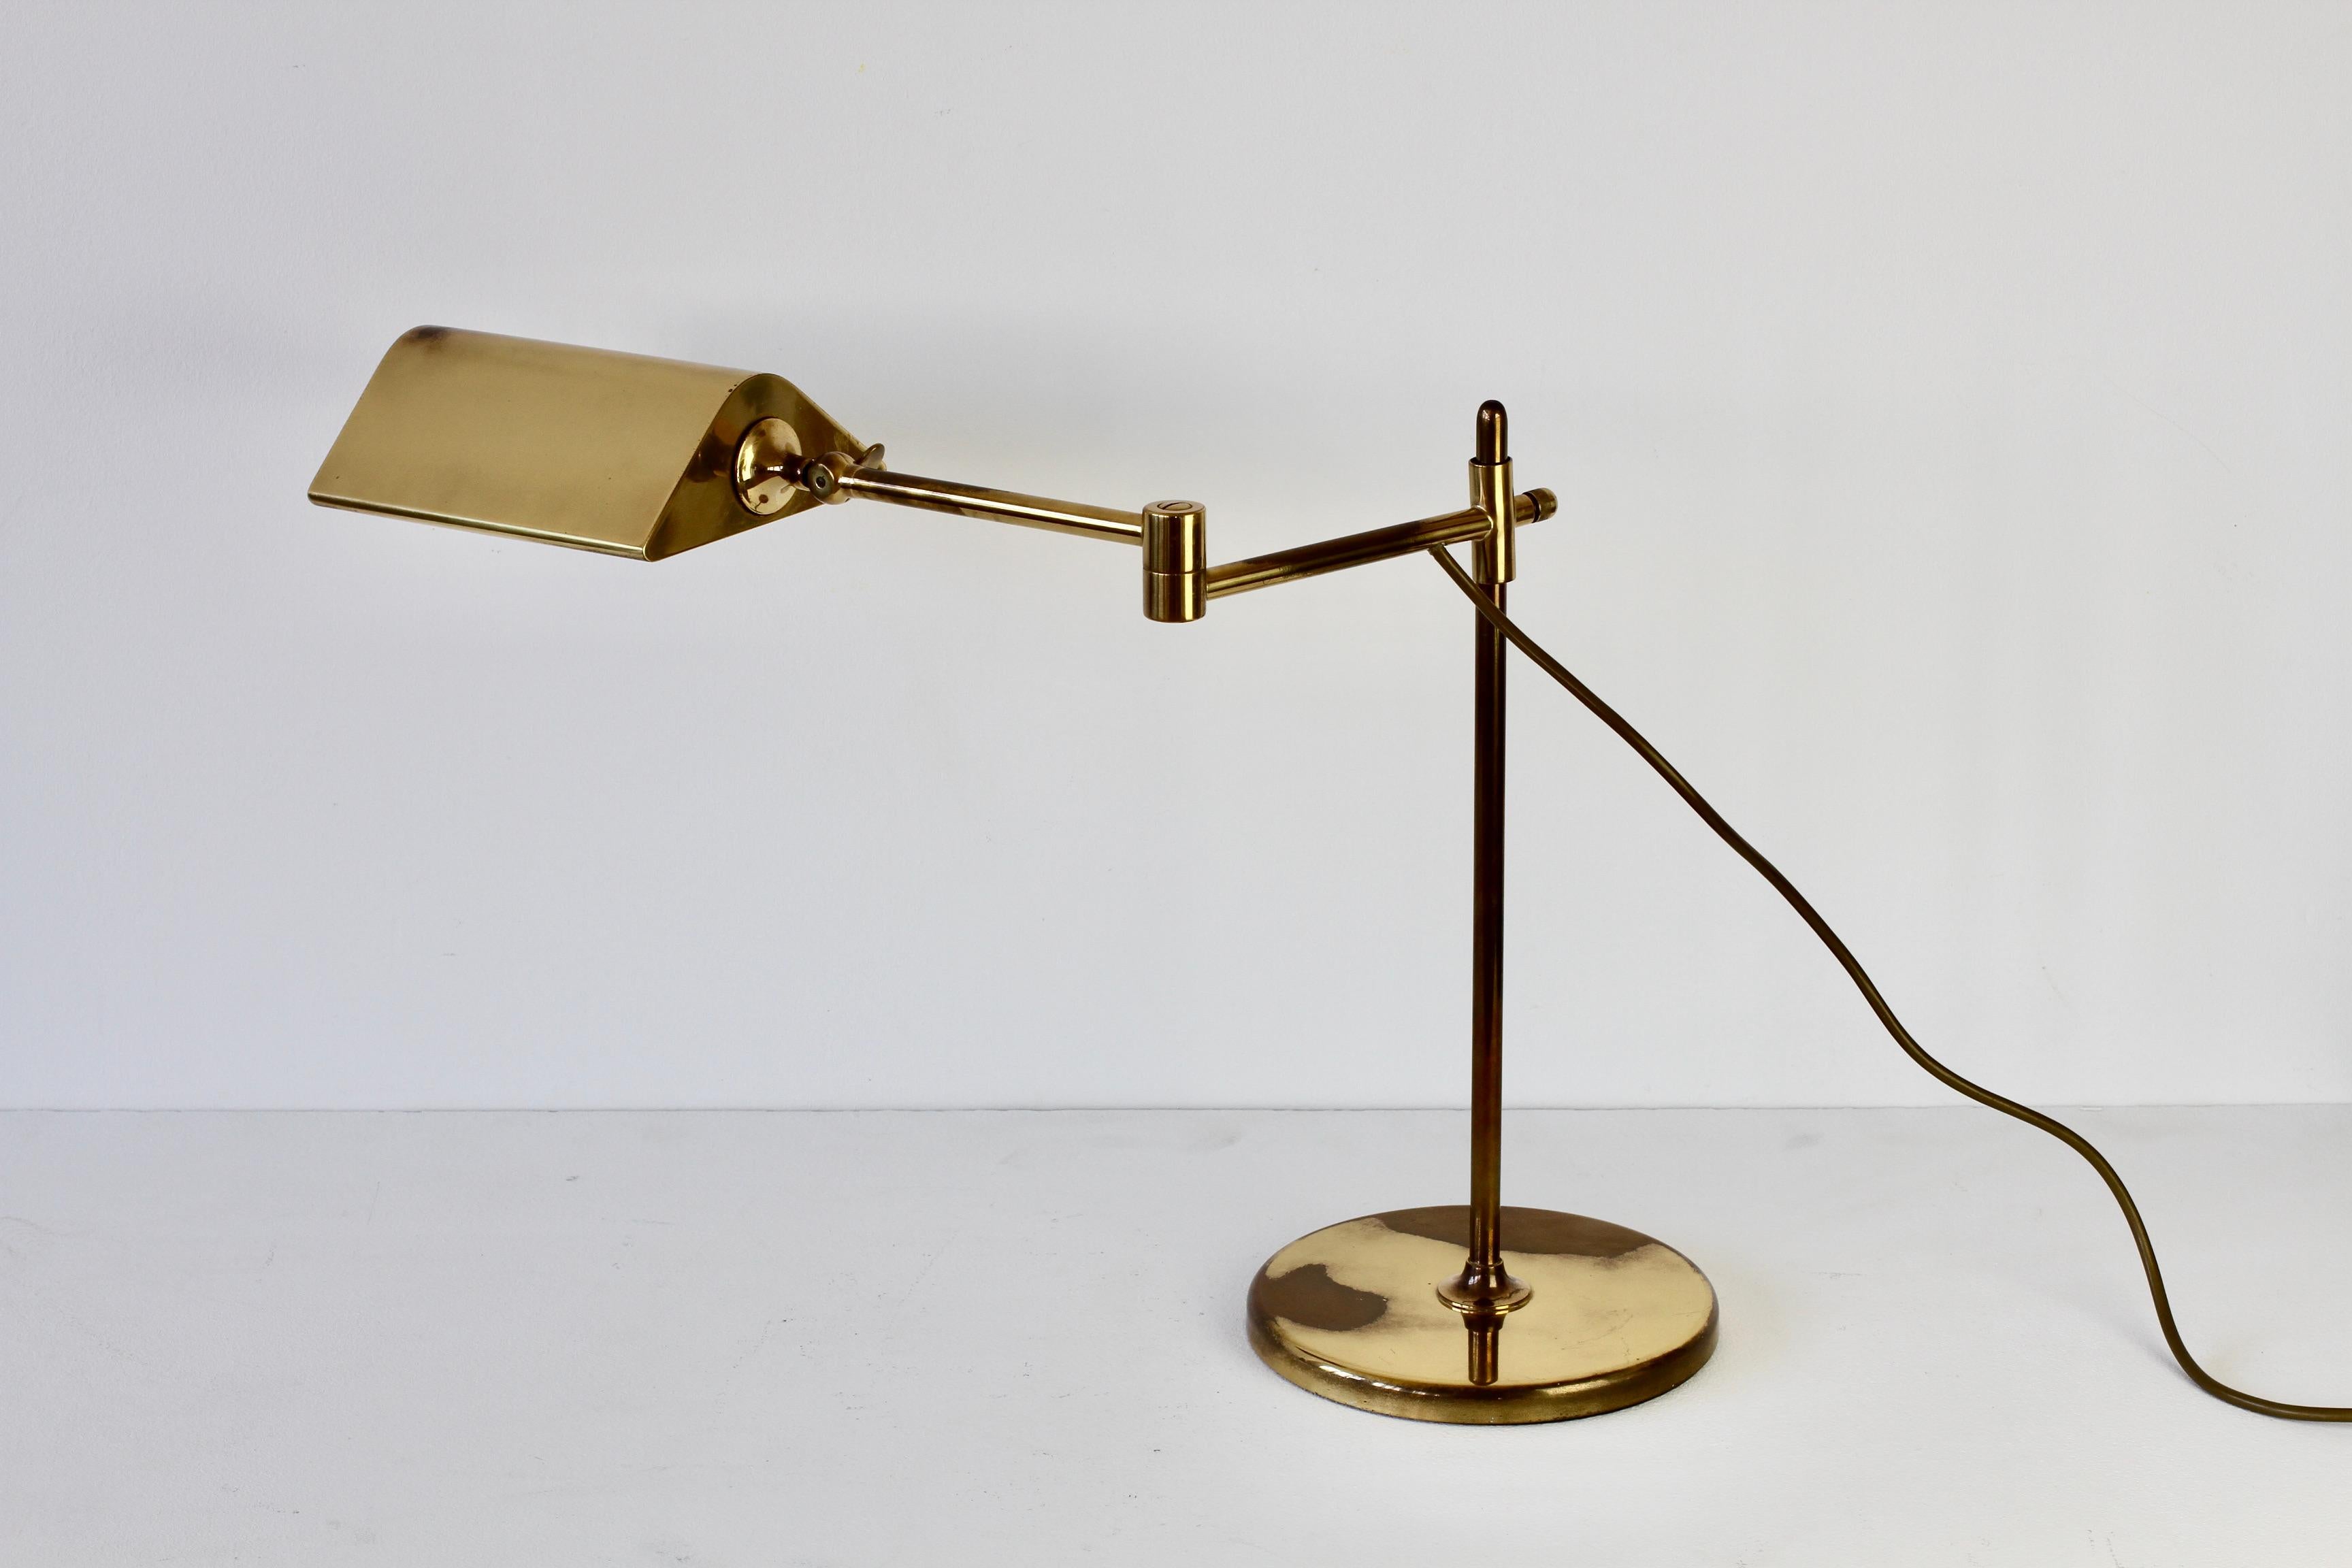 Wonderful Mid-Century Modern vintage German table lamp or desk lamp designed by Florian Schulz in the 1970s. This lamp was made circa 1970s and is quite rare model with the double linked extendable arm which. can be height adjusted on the brass